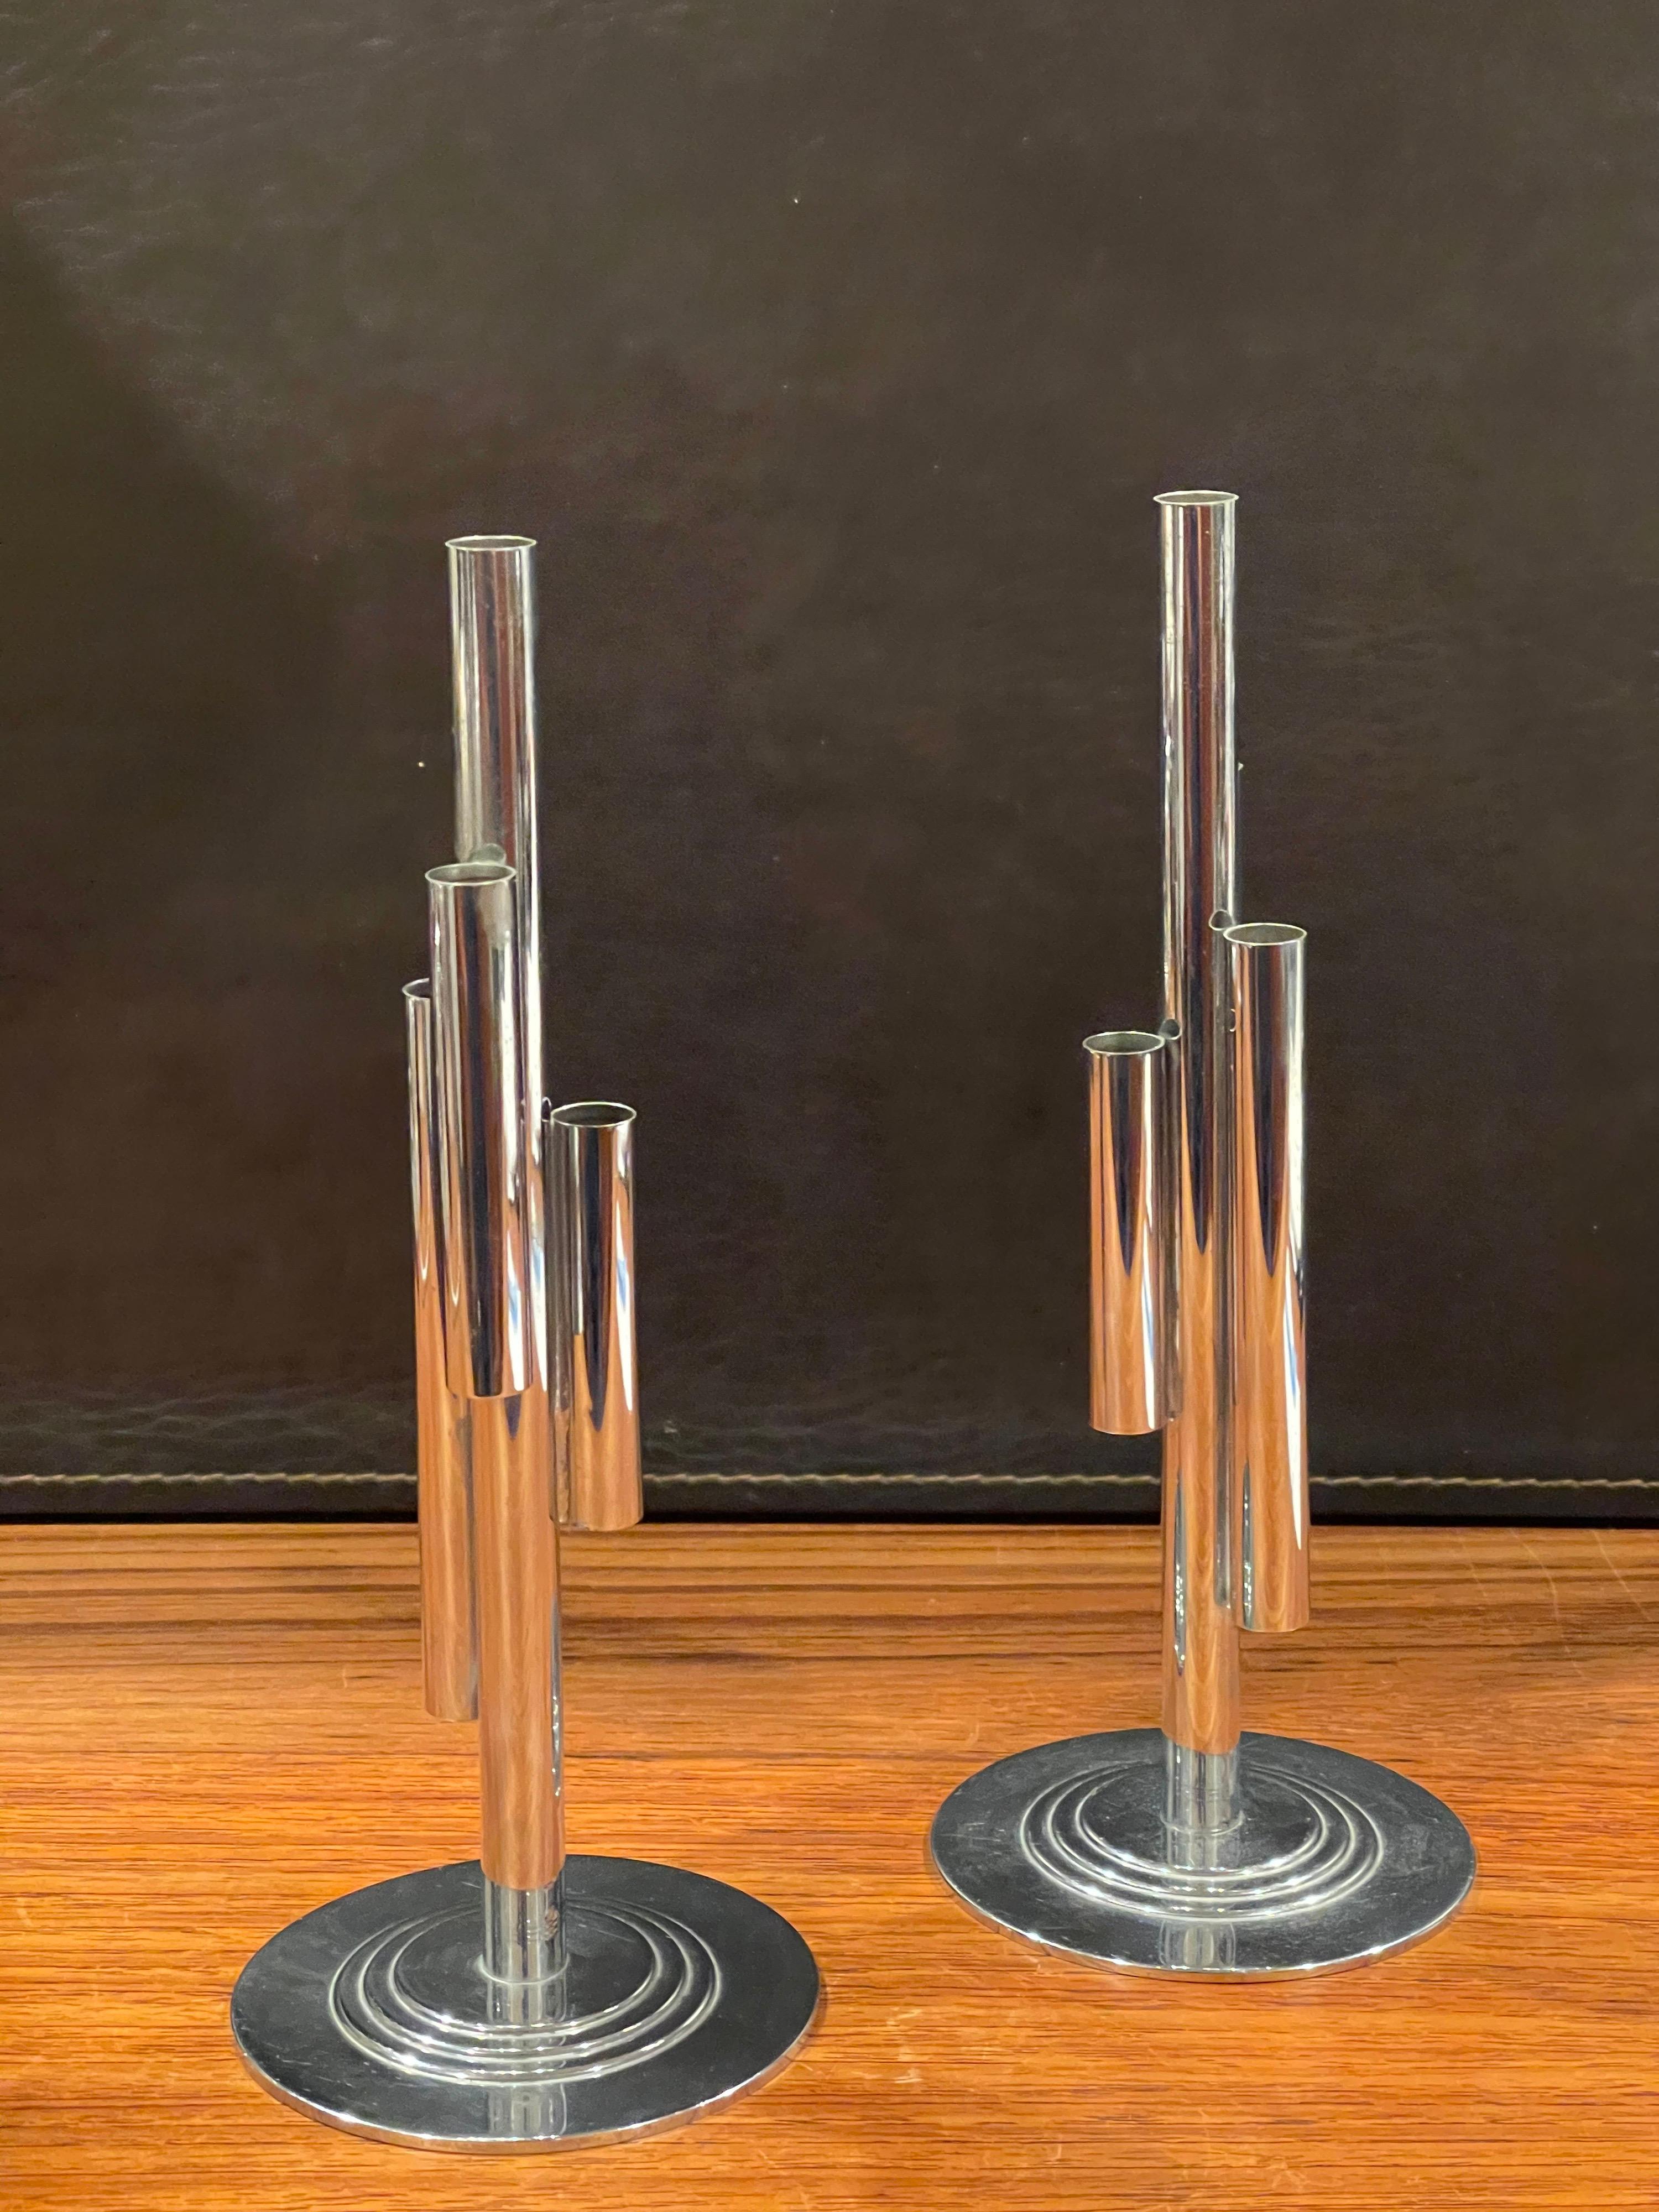 20th Century Pair of Art Deco Tubular Chrome Bud Vases by Ruth & William Gerth for Chase Co For Sale